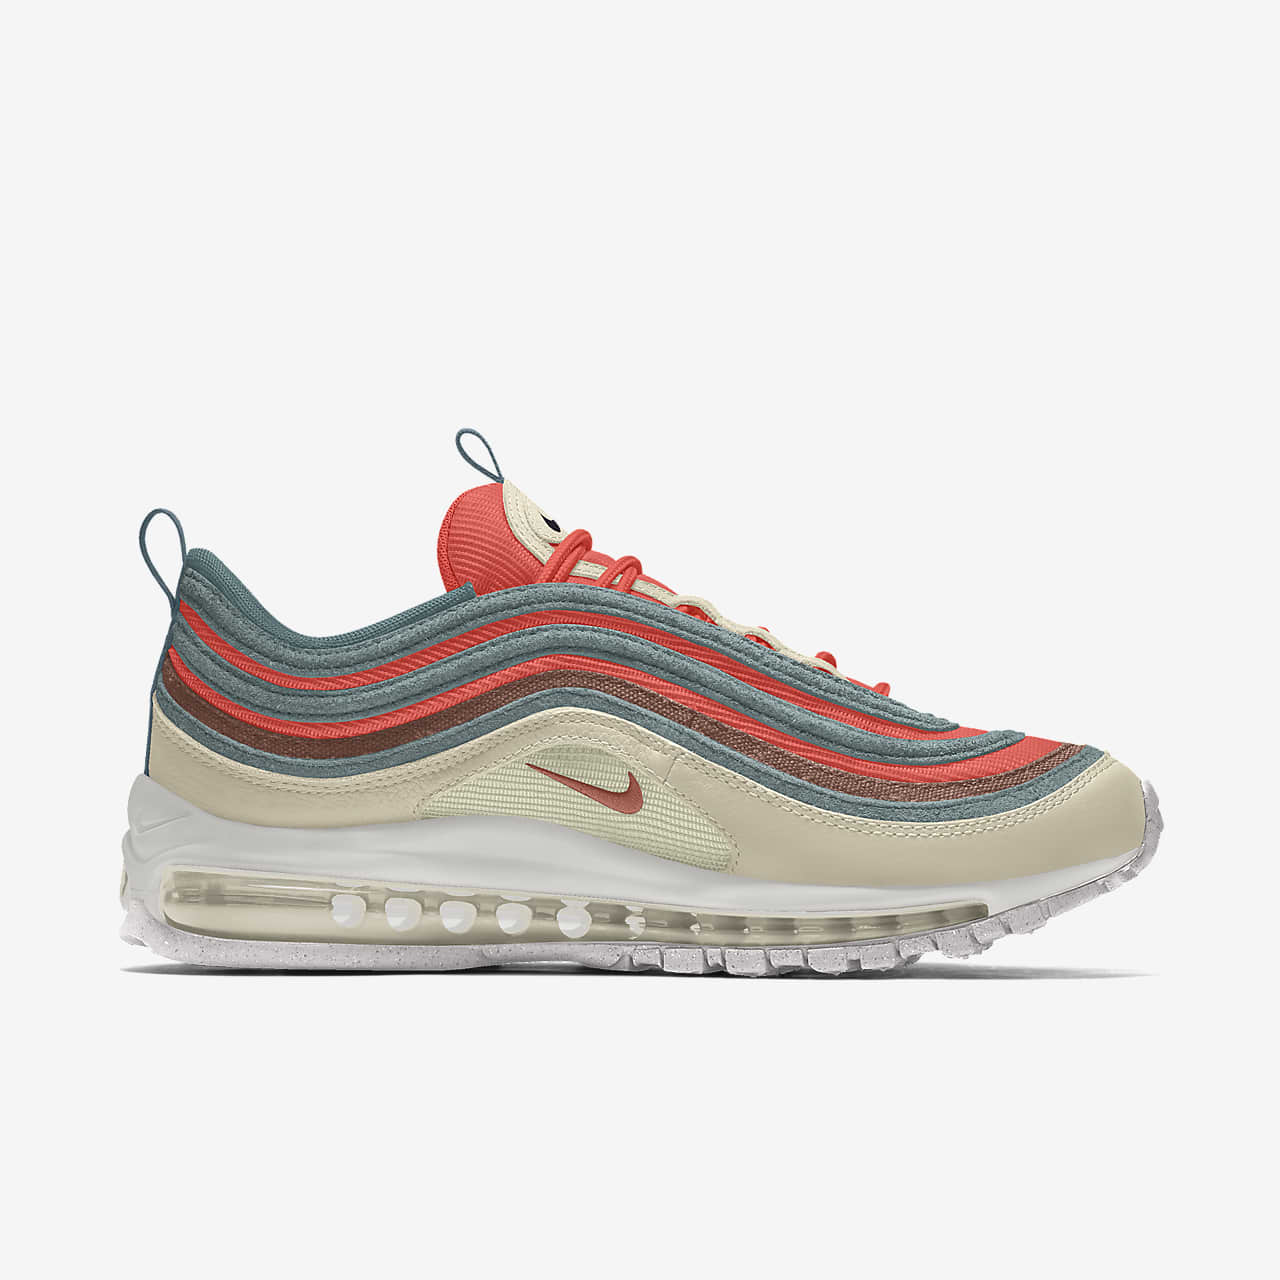 Contradiction remarque Sortant customized air max 97 Circonférence ...